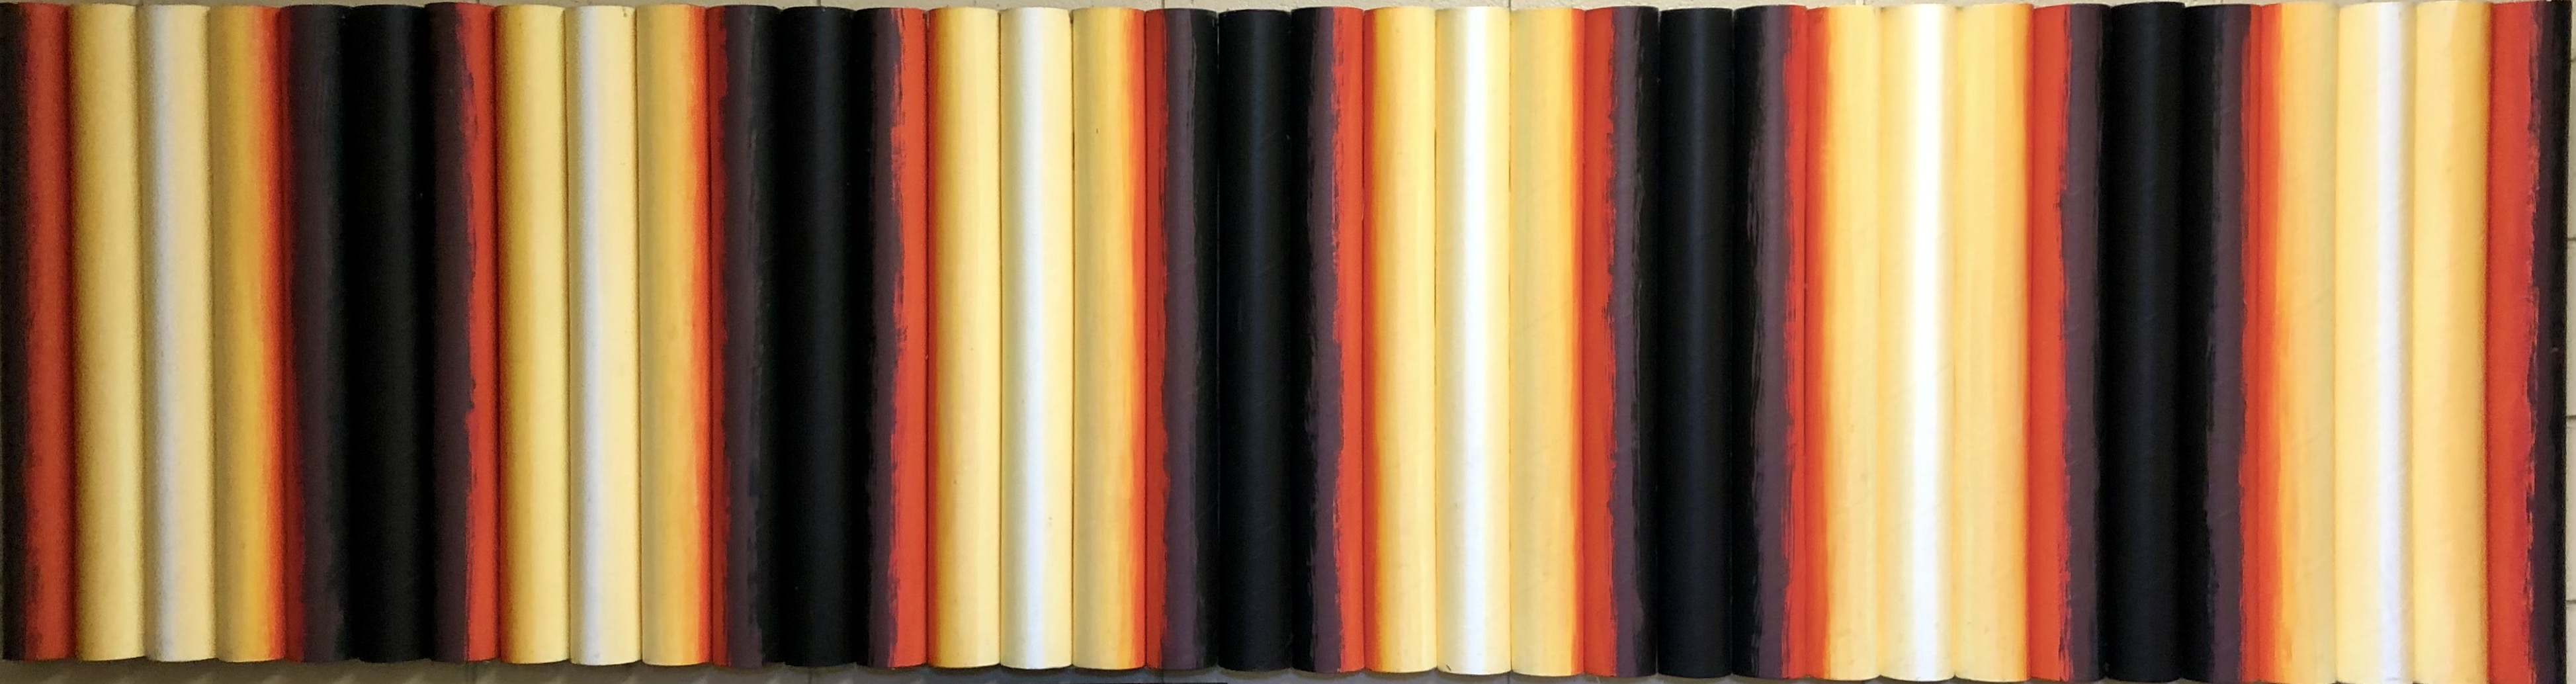 Vertical yellow, red, white, and black cardboard cylinders are positioned in a long horizontal line